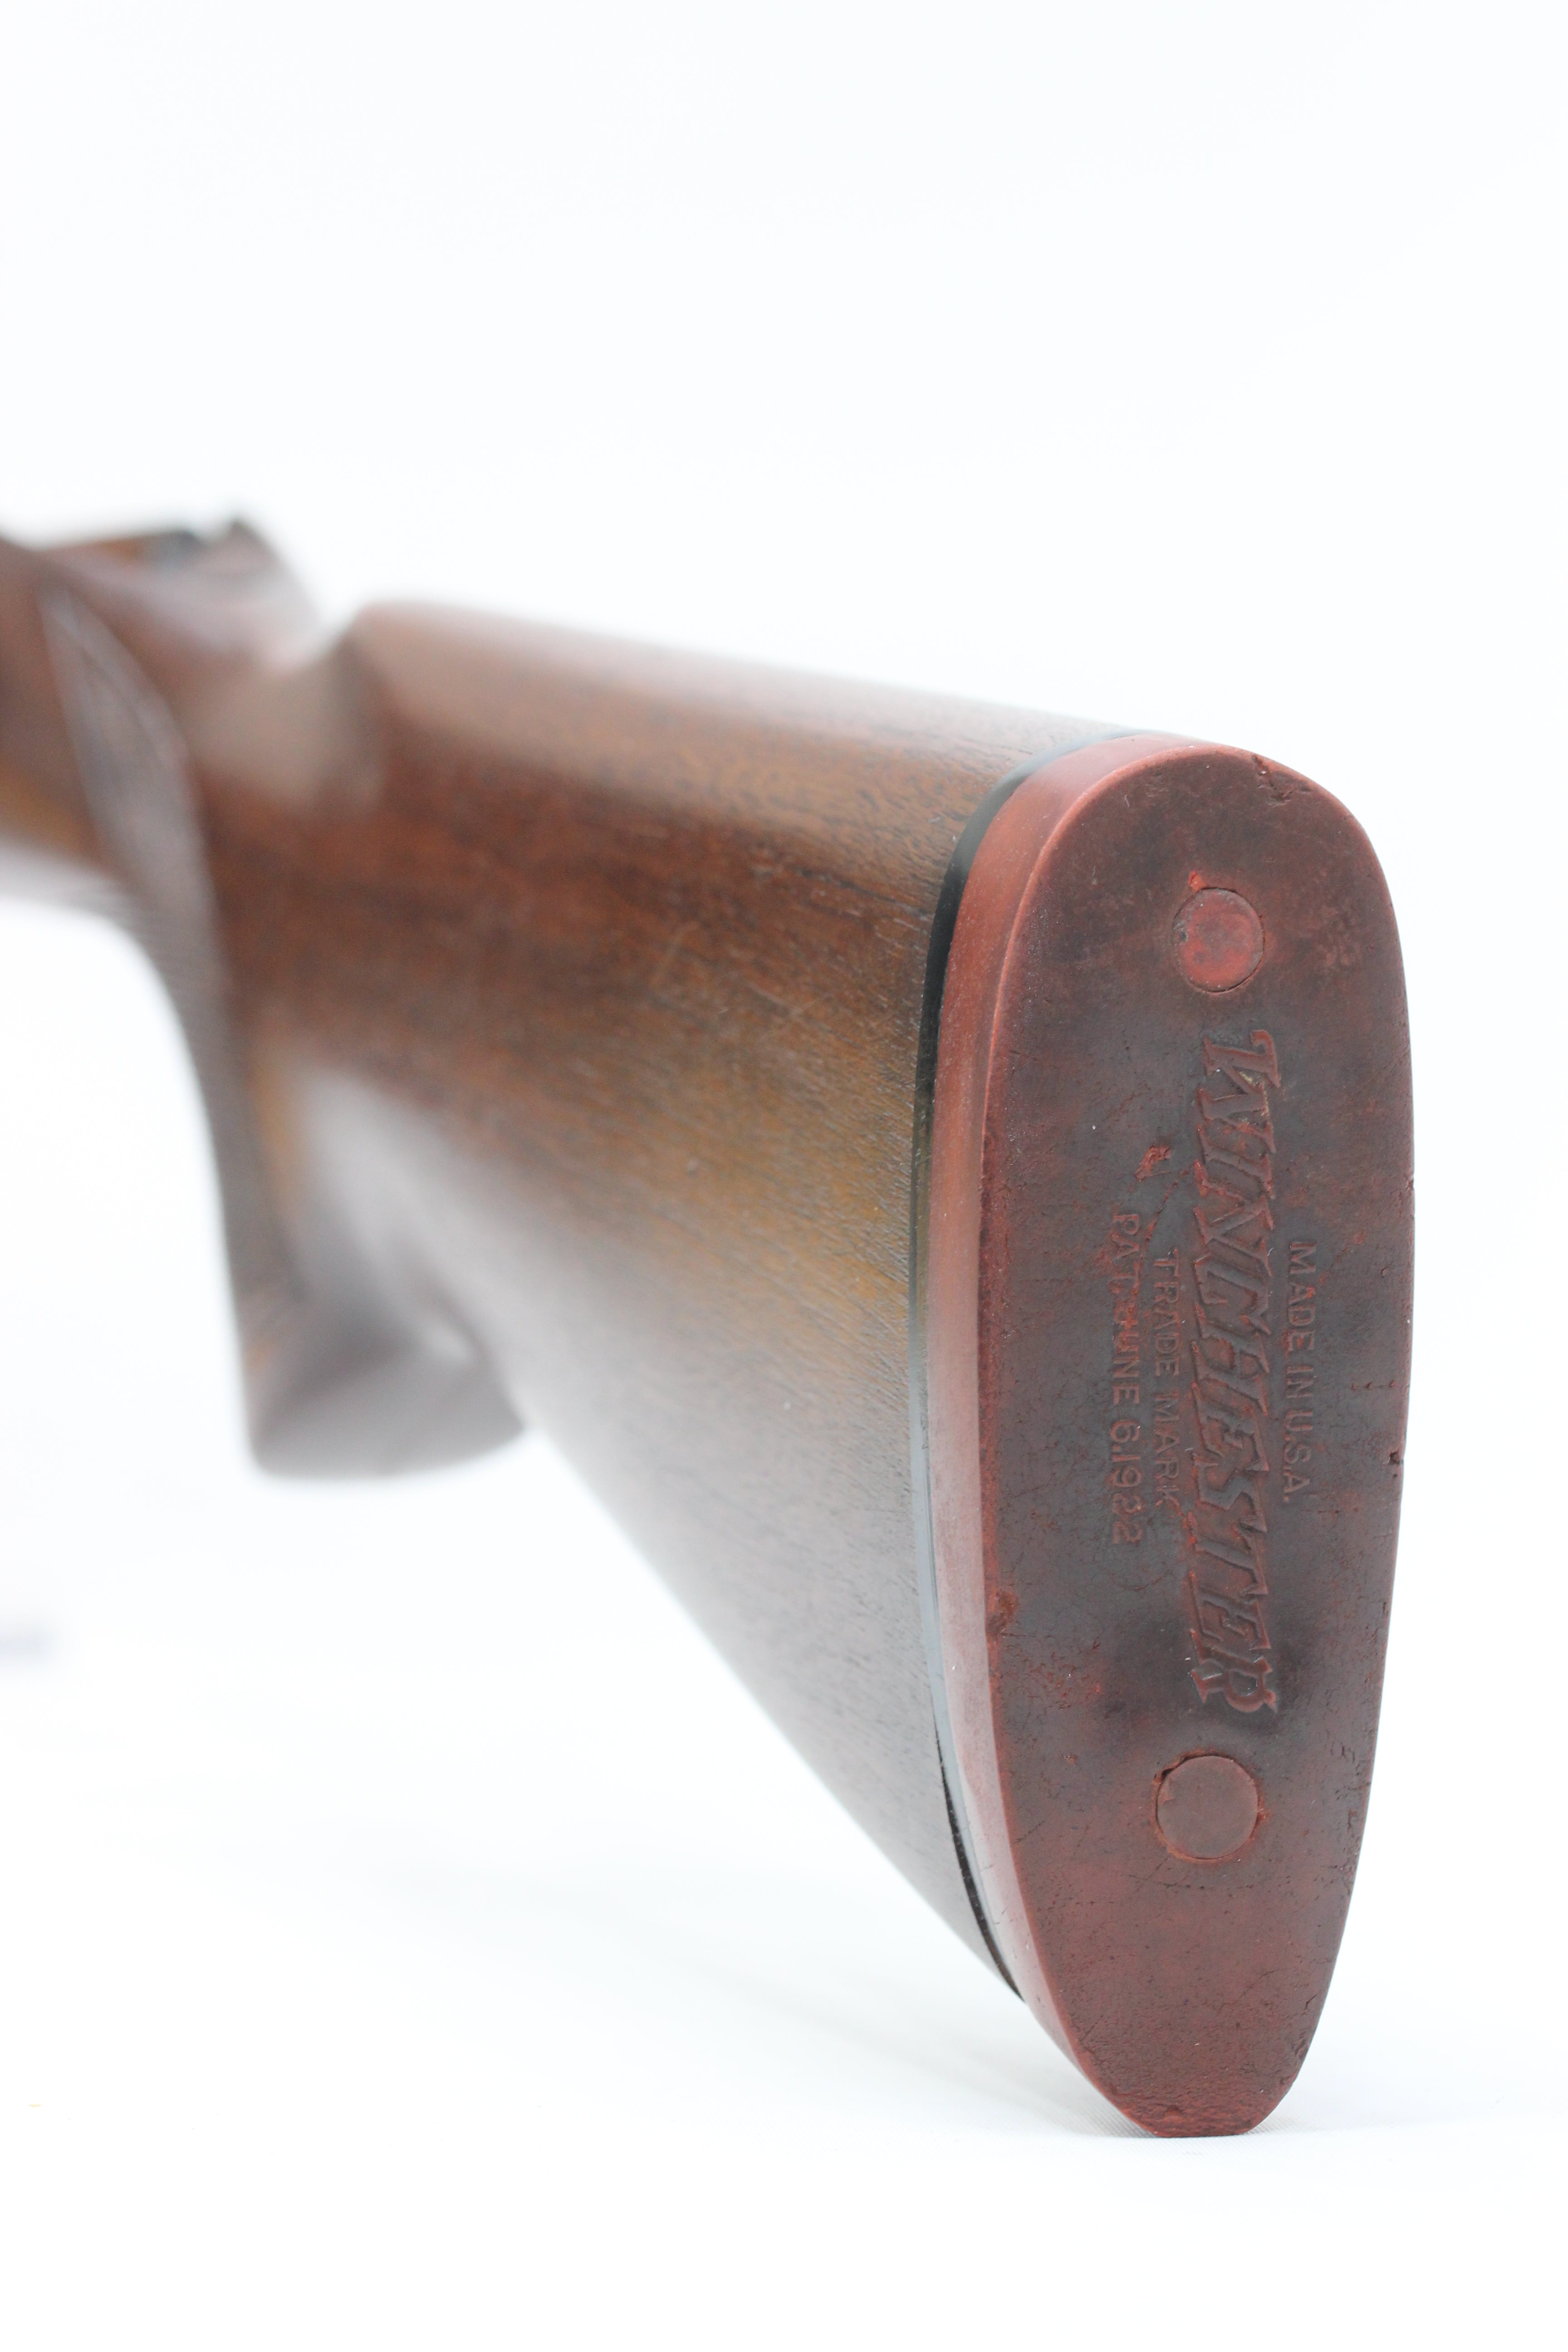 1952-1960 Low Comb Featherweight Rifle Stock - Shortened